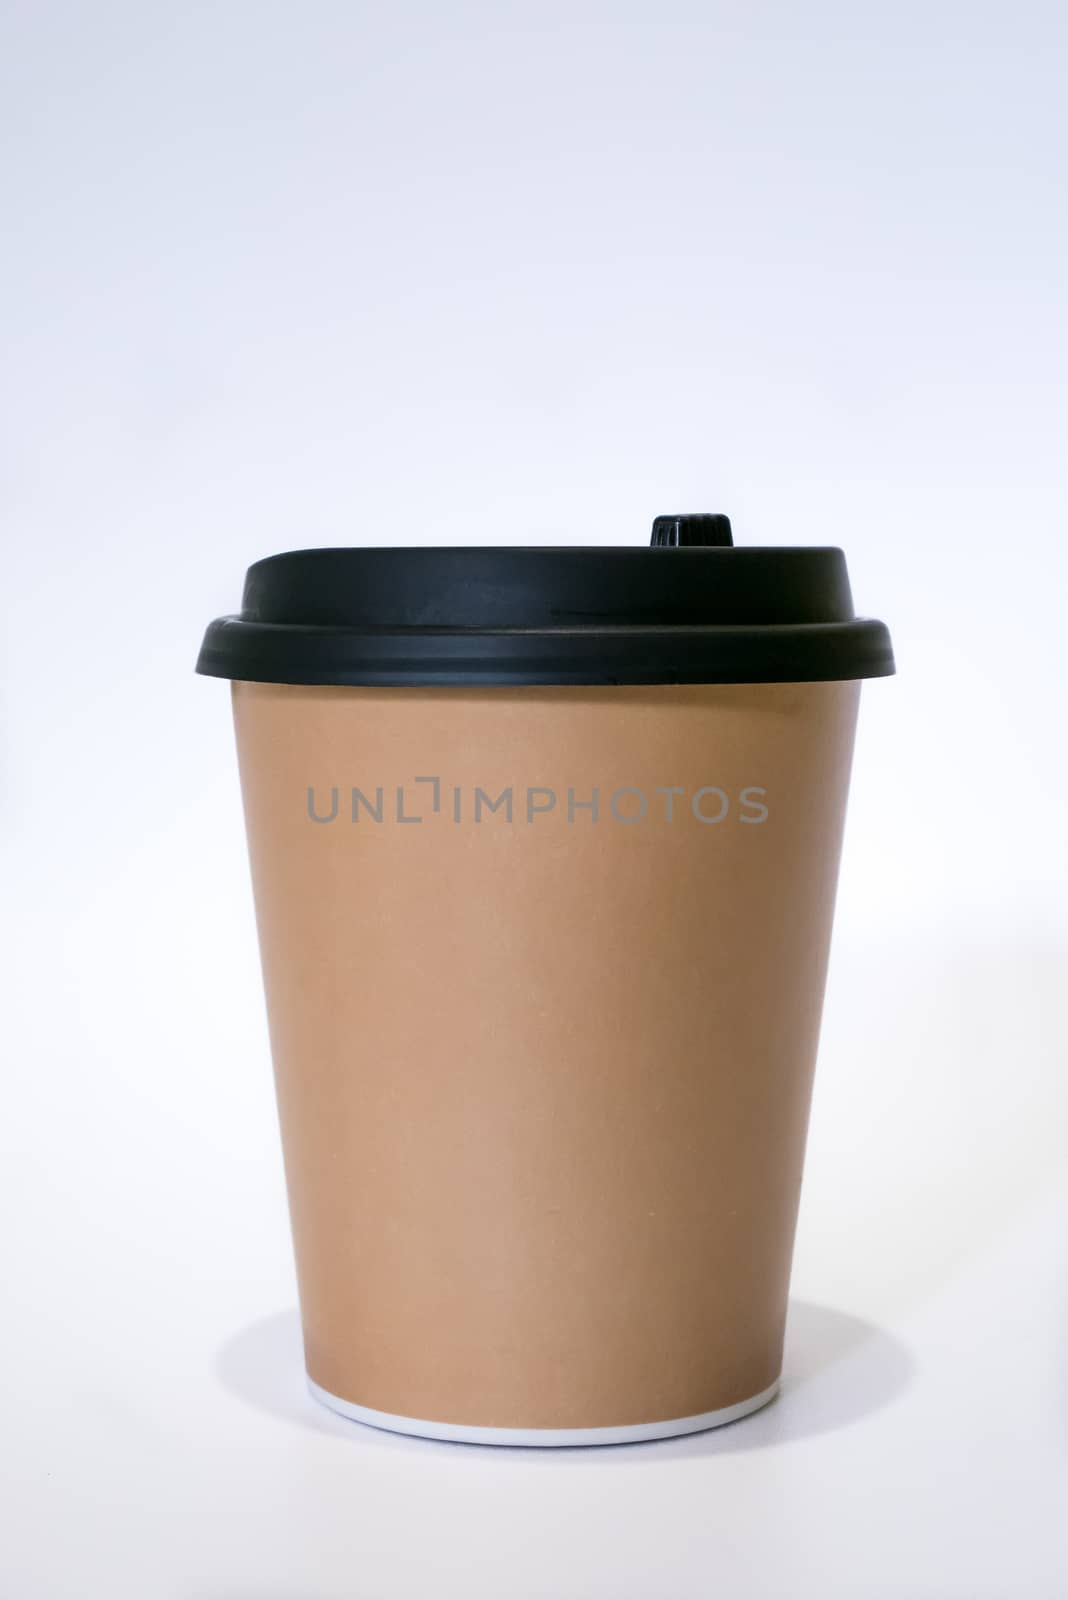 The brown paper cup of hot coffee with black cap.